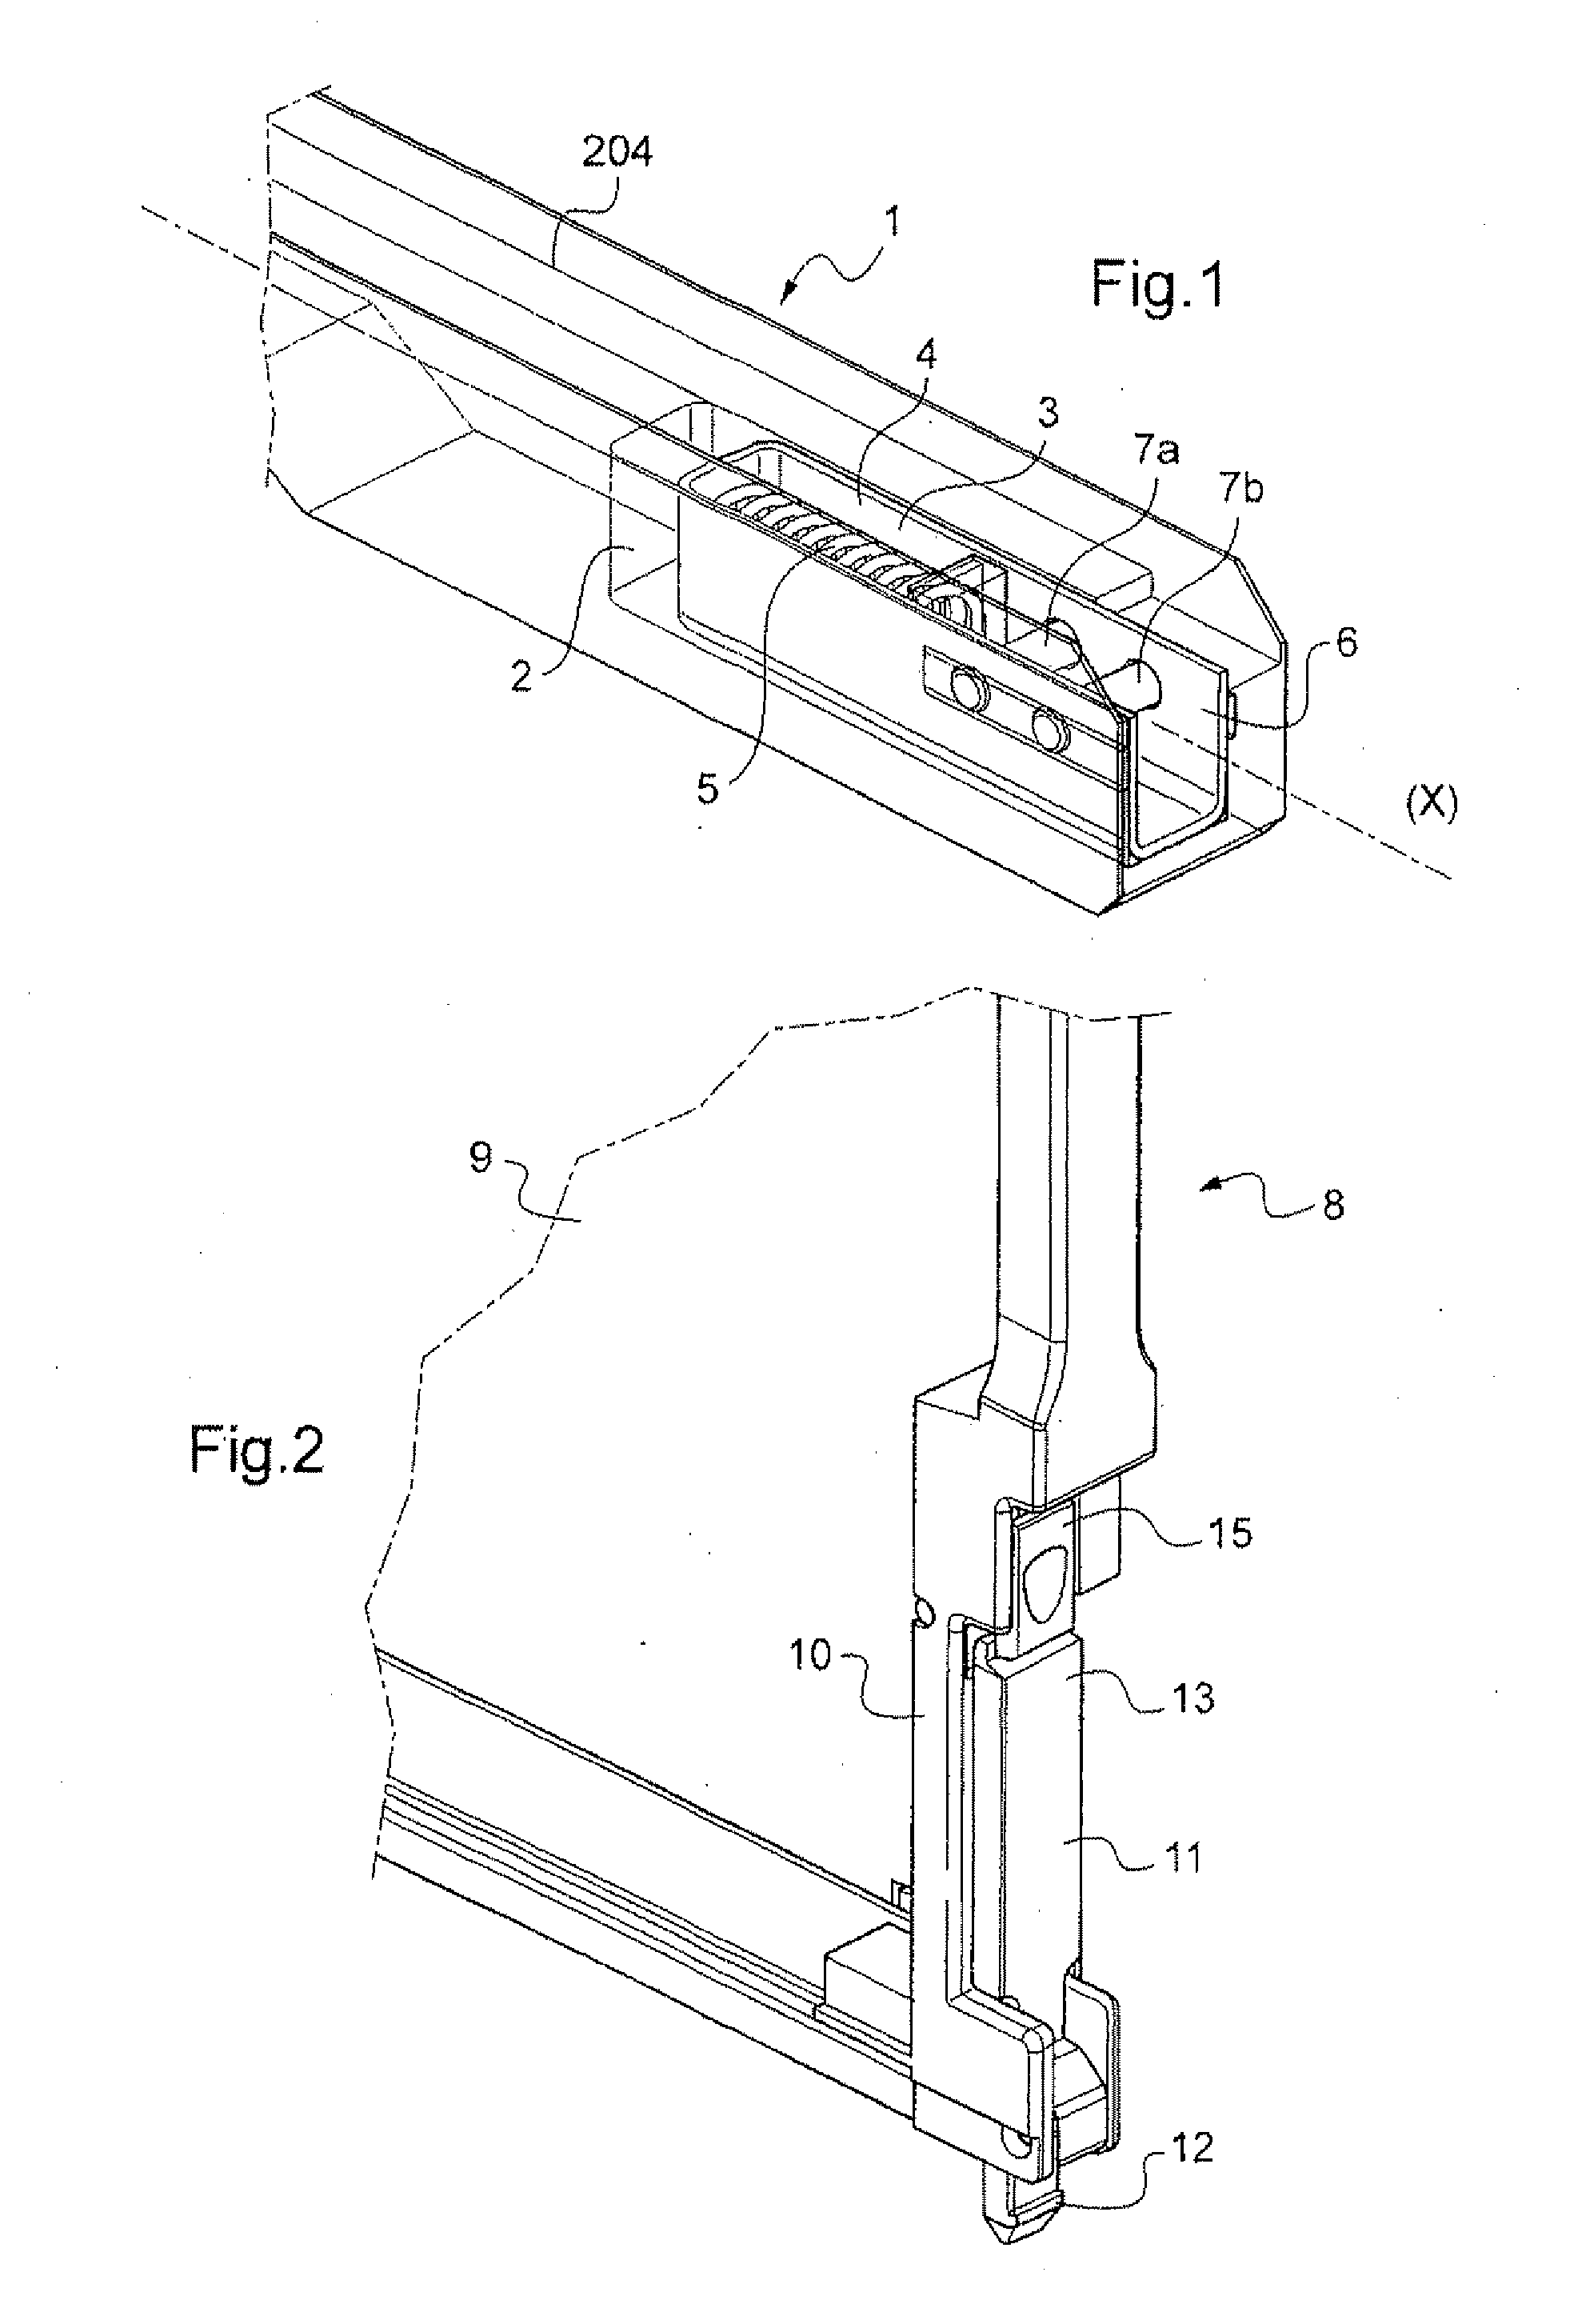 Locking assembly for locking an electronics card to a rack